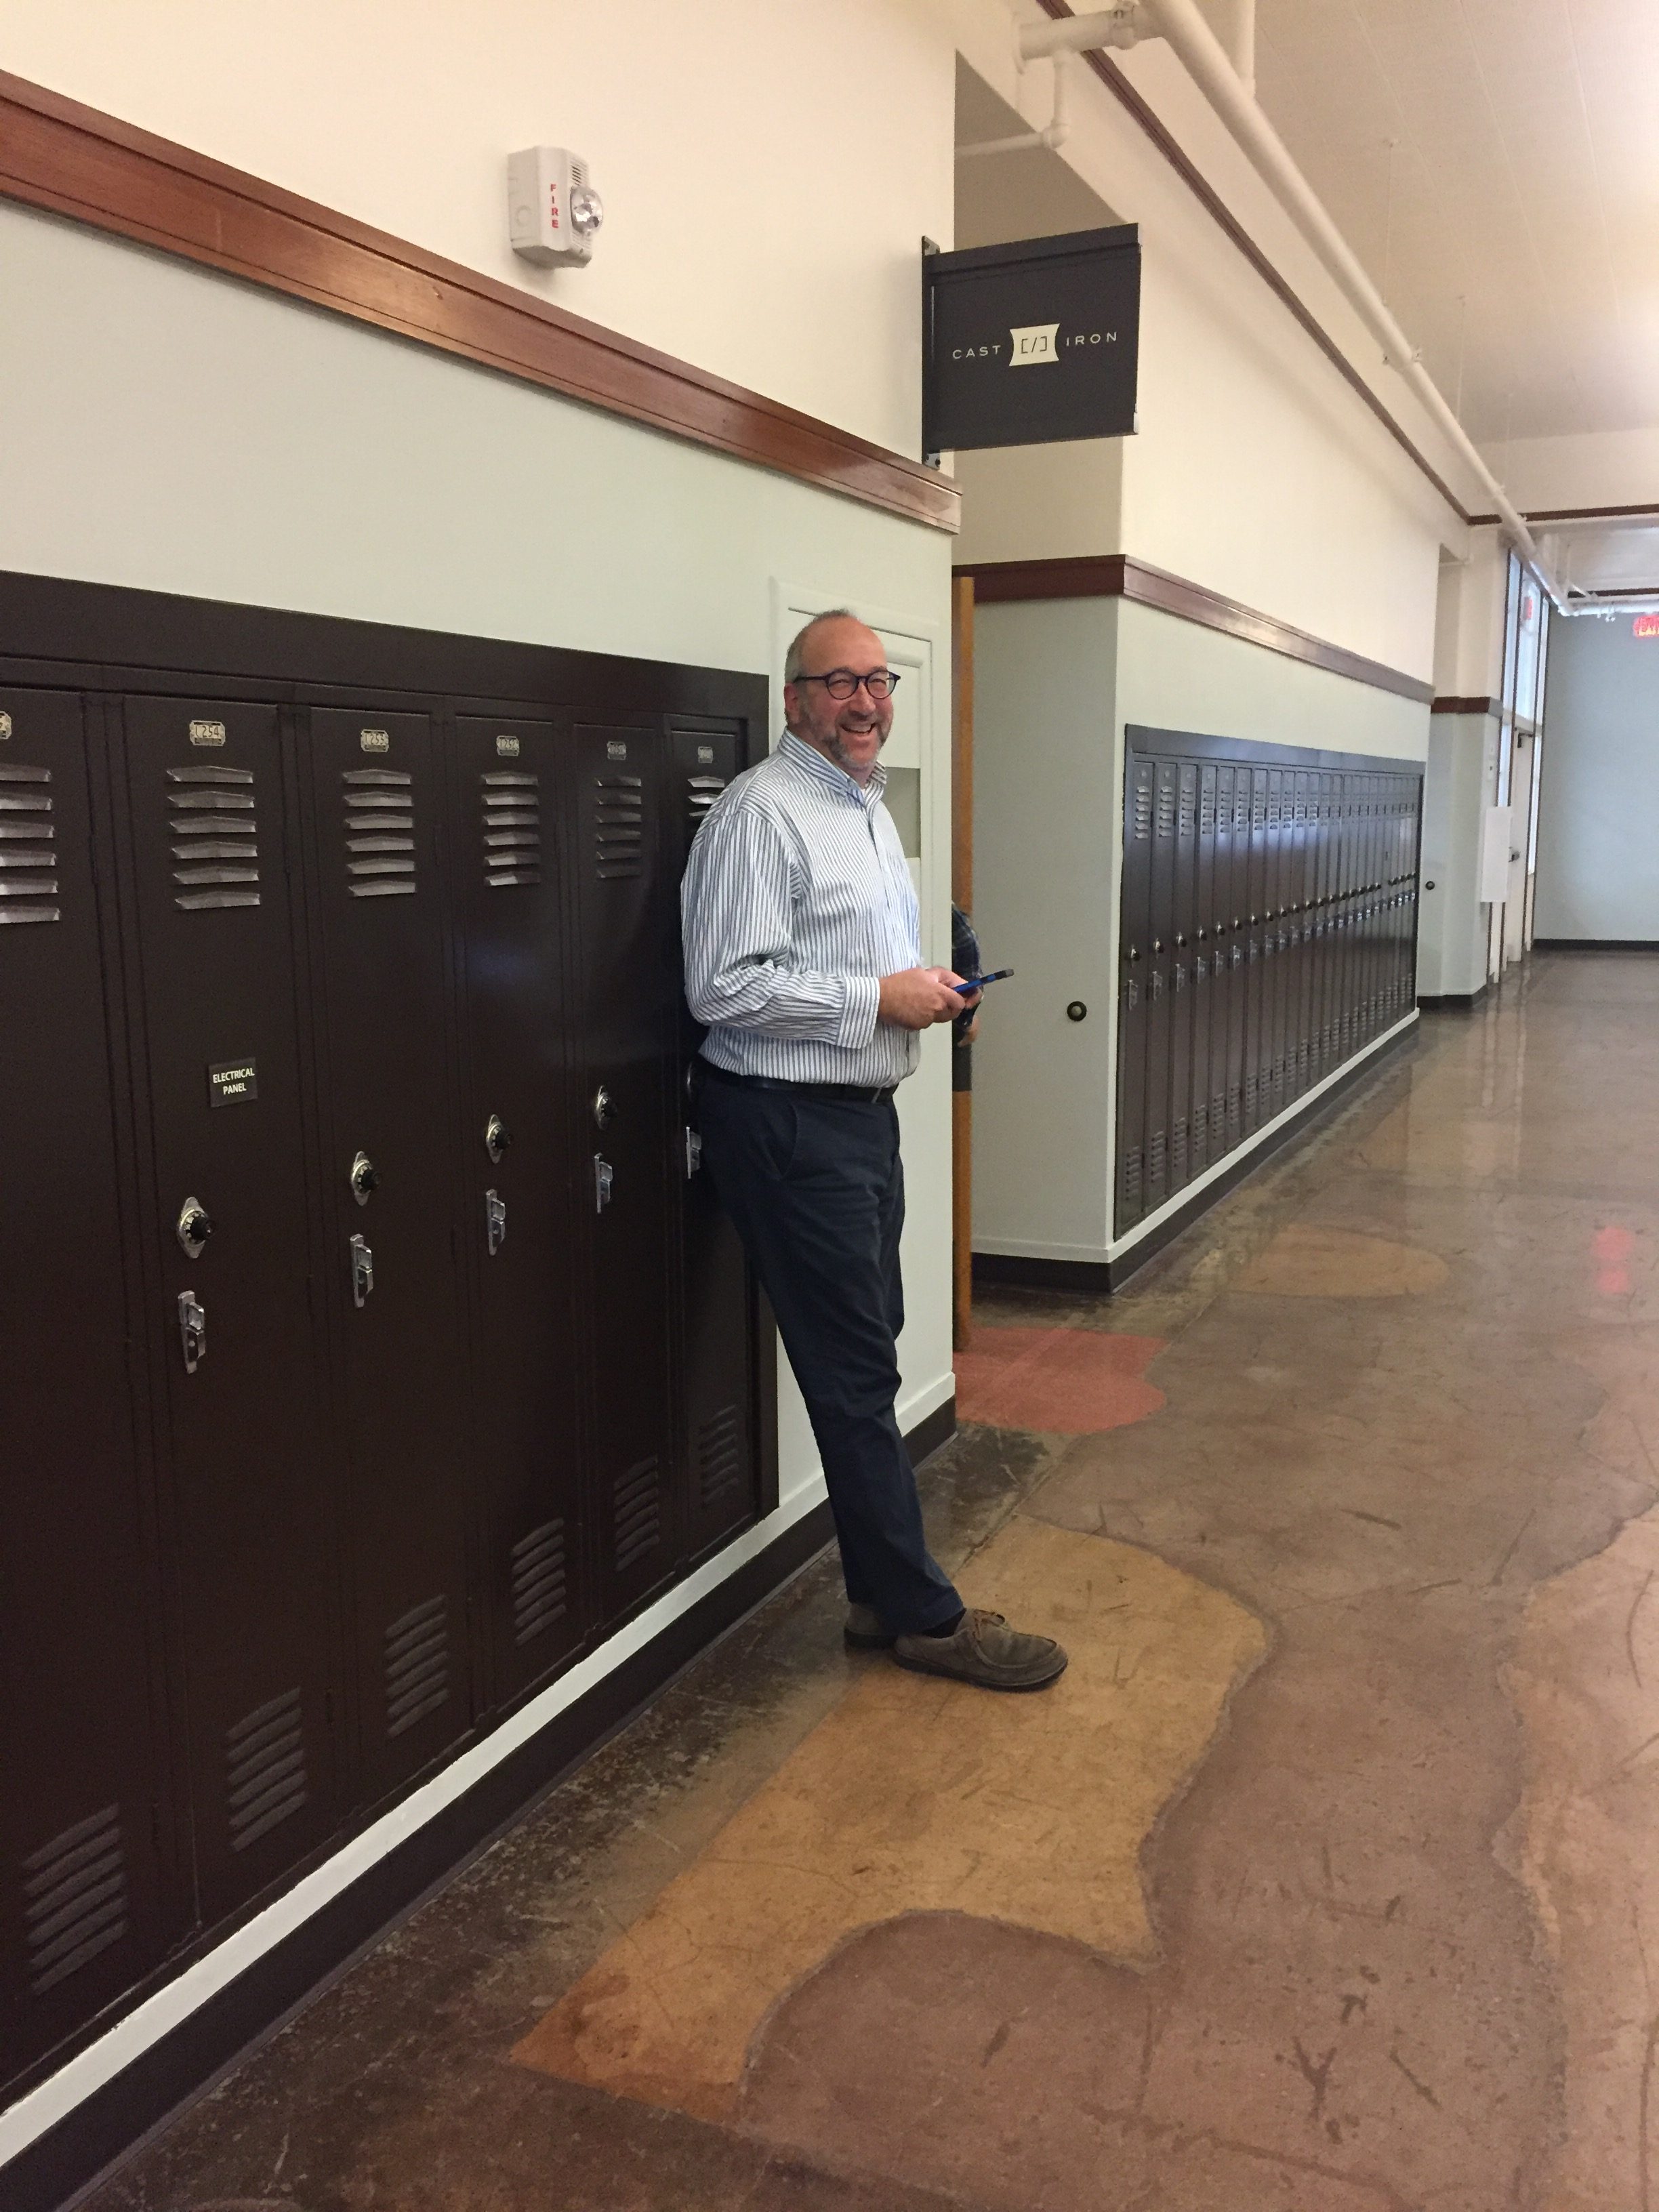 Doug in a school hallway with lockers under Cast Iron Coding sign